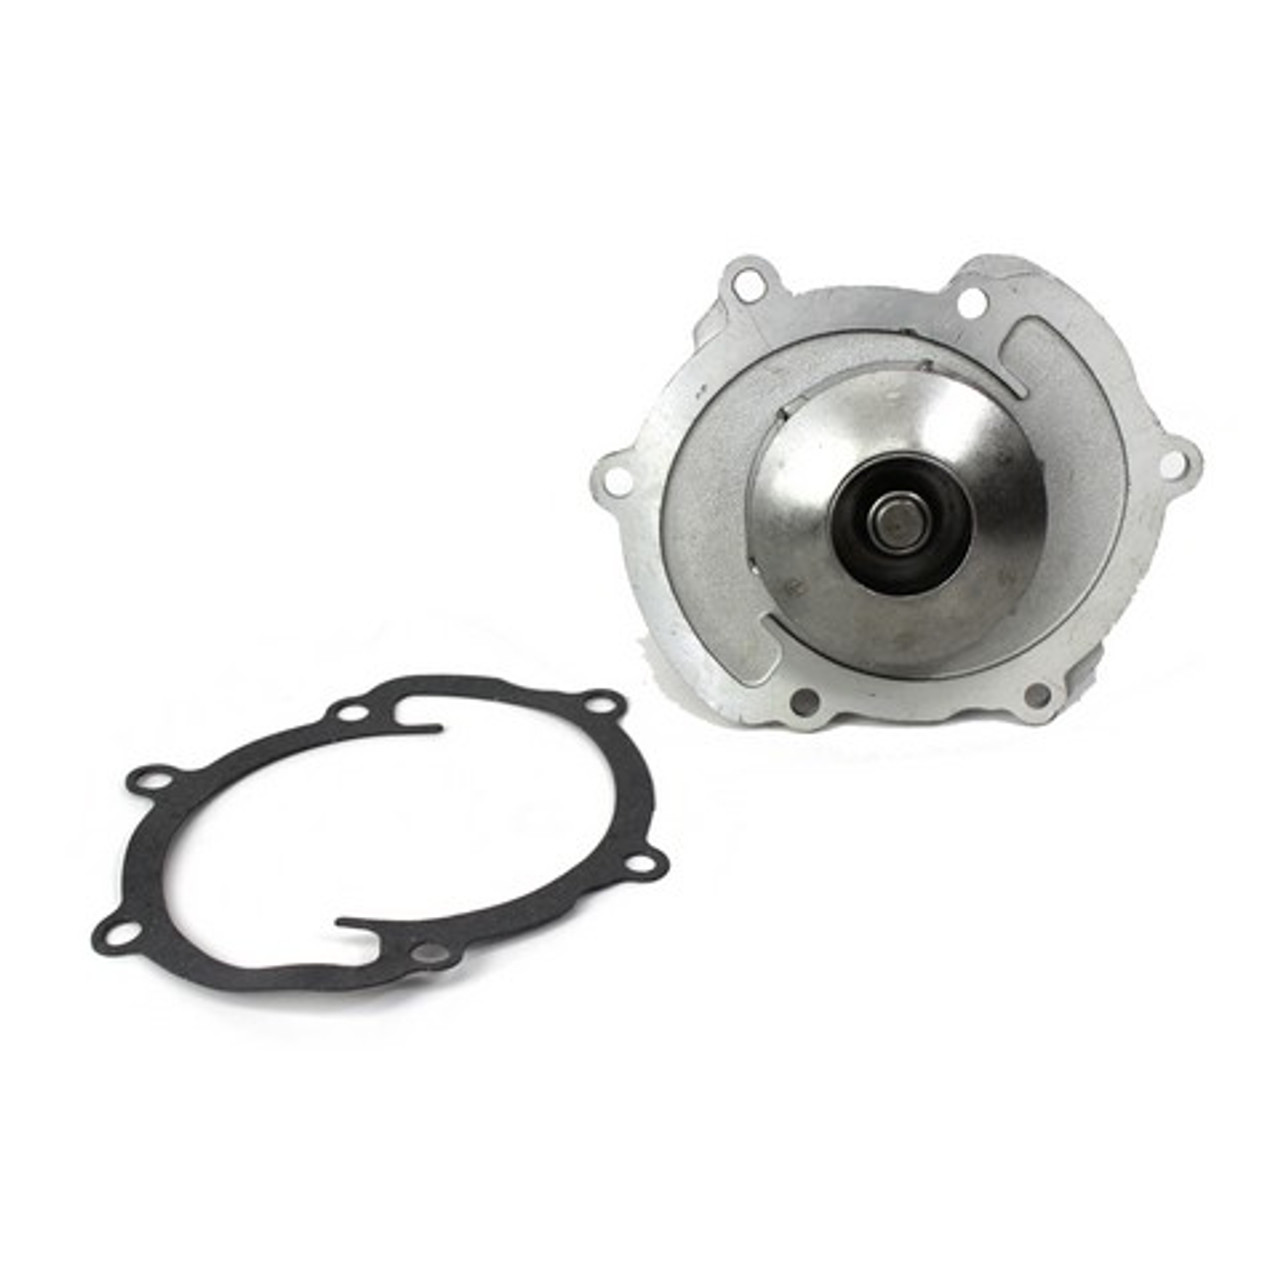 2010 Saturn Outlook 3.6L Water Pump WP3139.E168